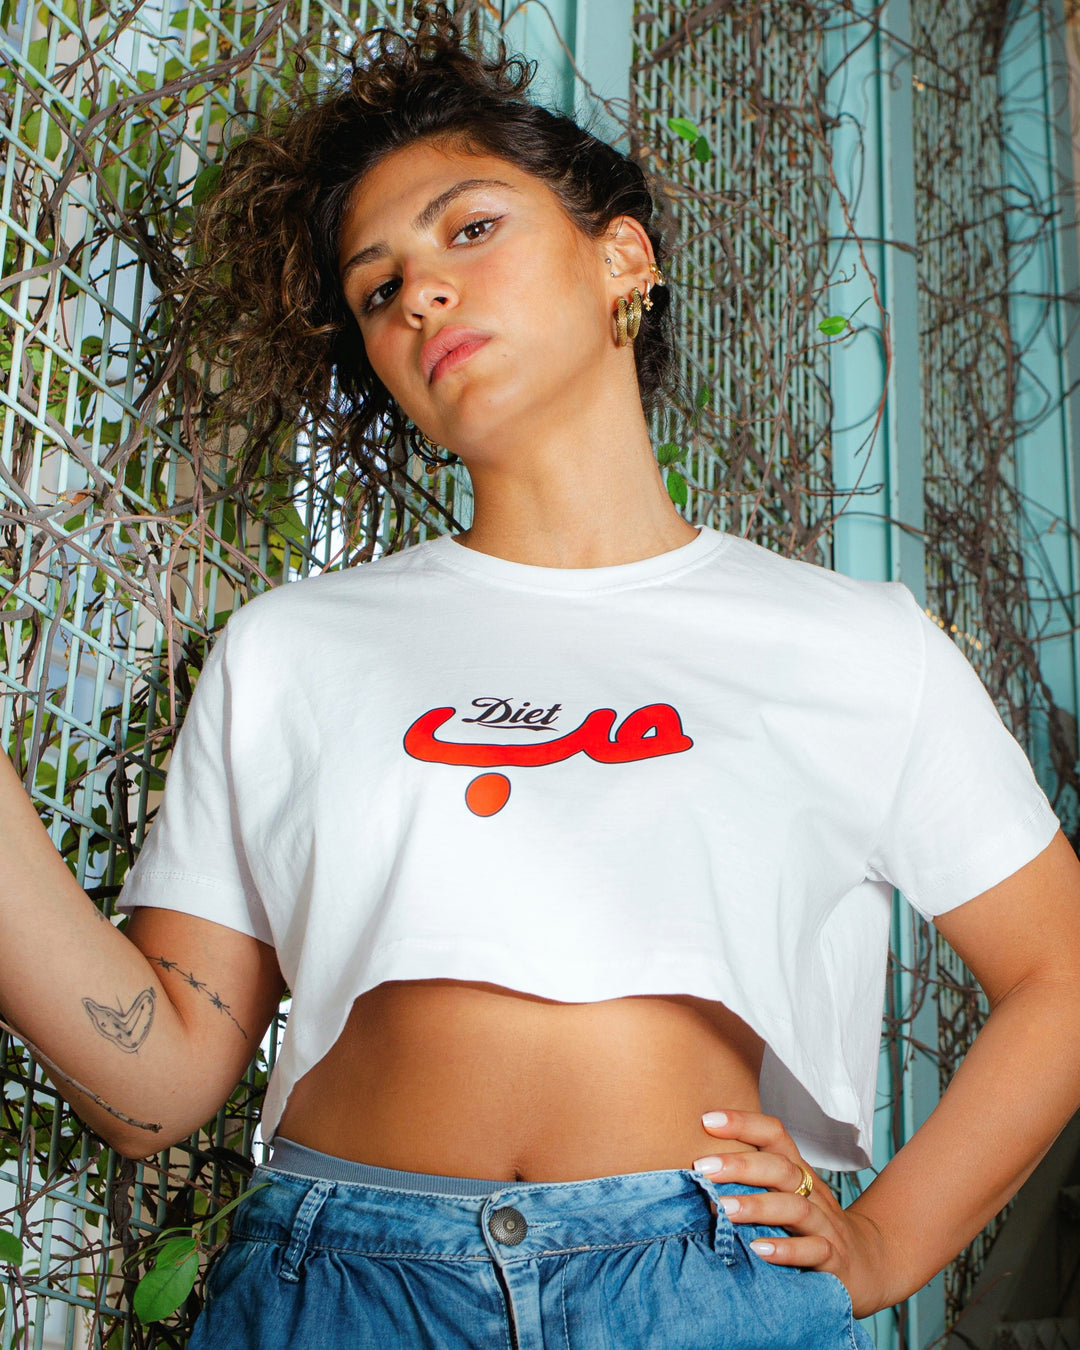 Young adult female wearing white Crop Top with Diet Hobb written in English and Arabic حب and printed in red silkscreen in the center of the Crop Top.